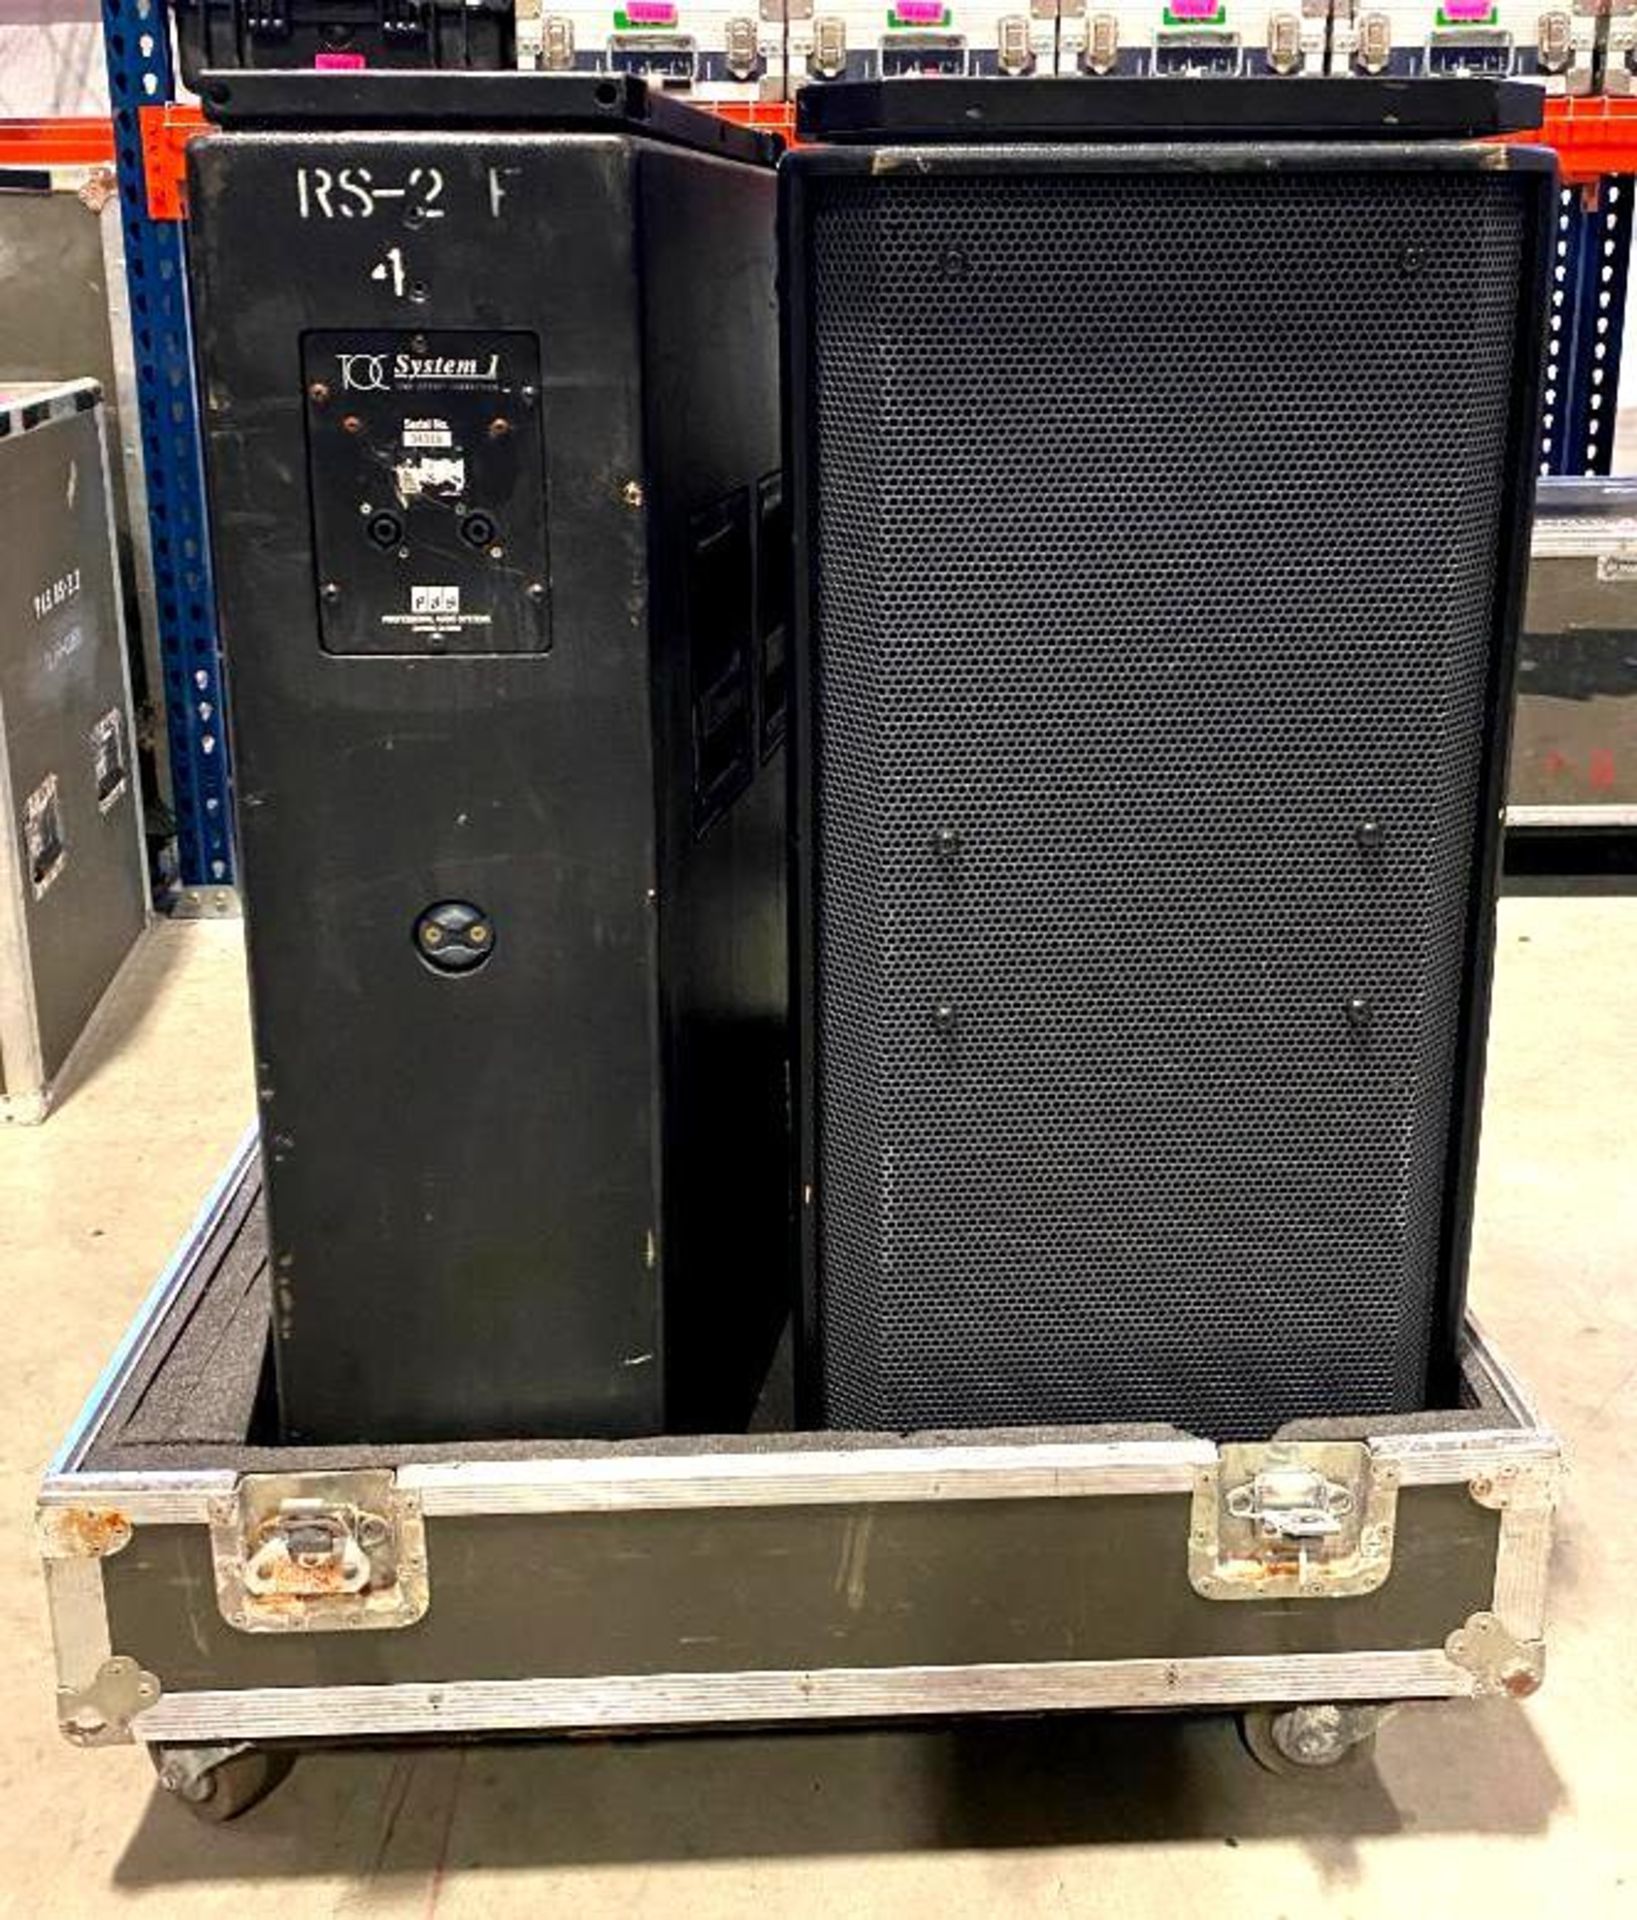 DESCRIPTION 2CT PROFESSIONAL CONCERT SYSTEM PA SPEAKERS WITH ROAD CASE ON CASTERS BRAND/MODEL PAS RS